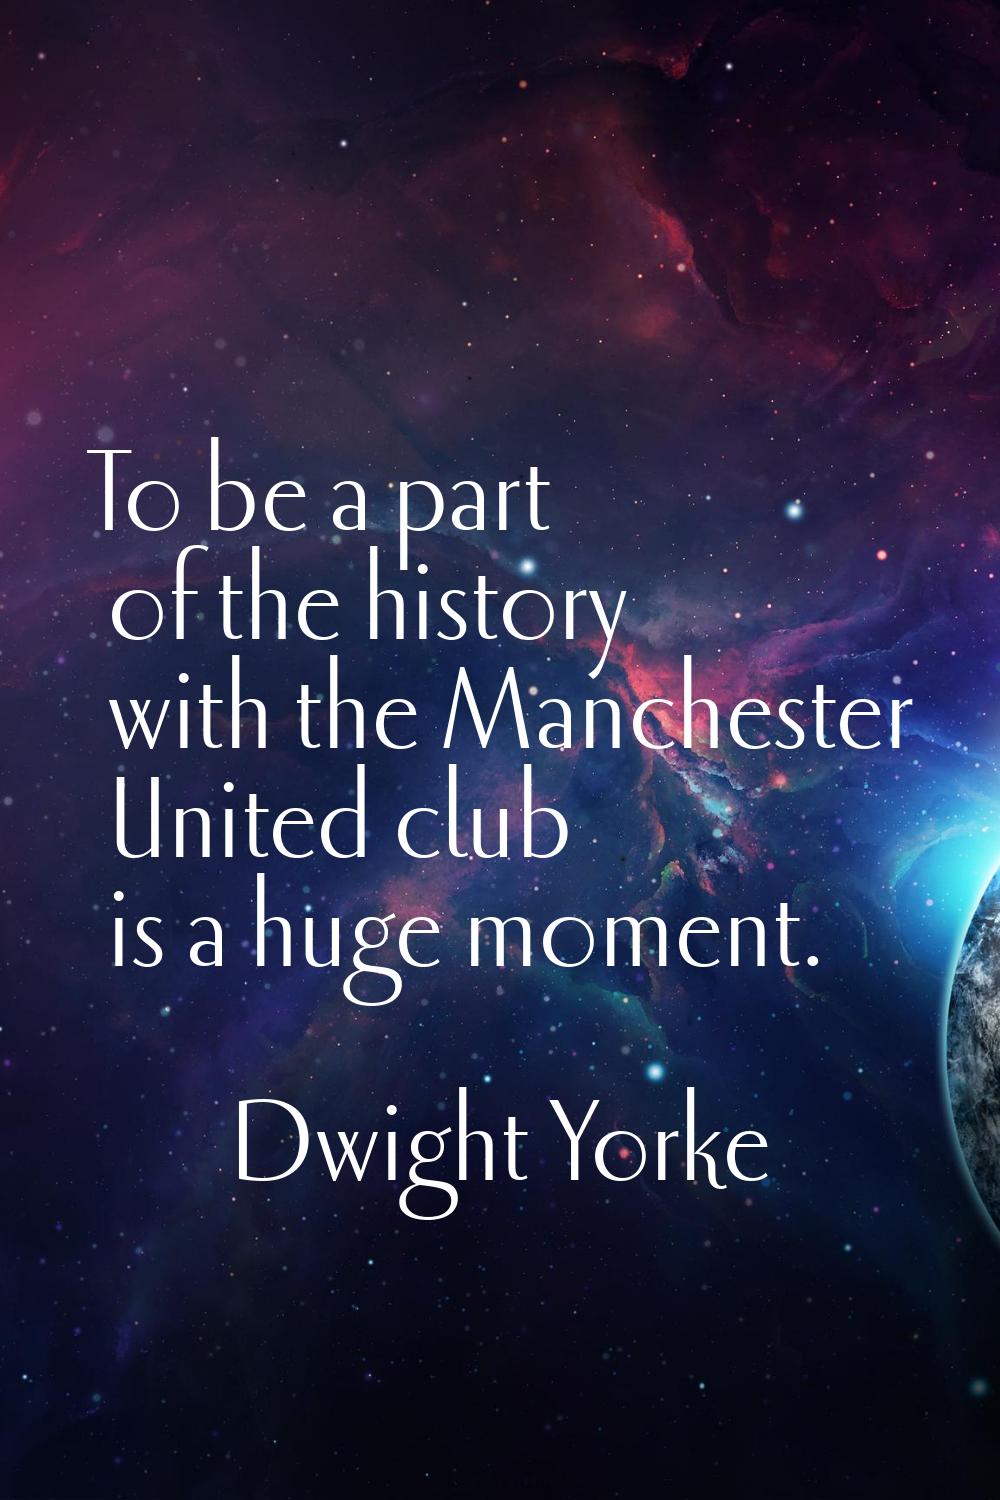 To be a part of the history with the Manchester United club is a huge moment.